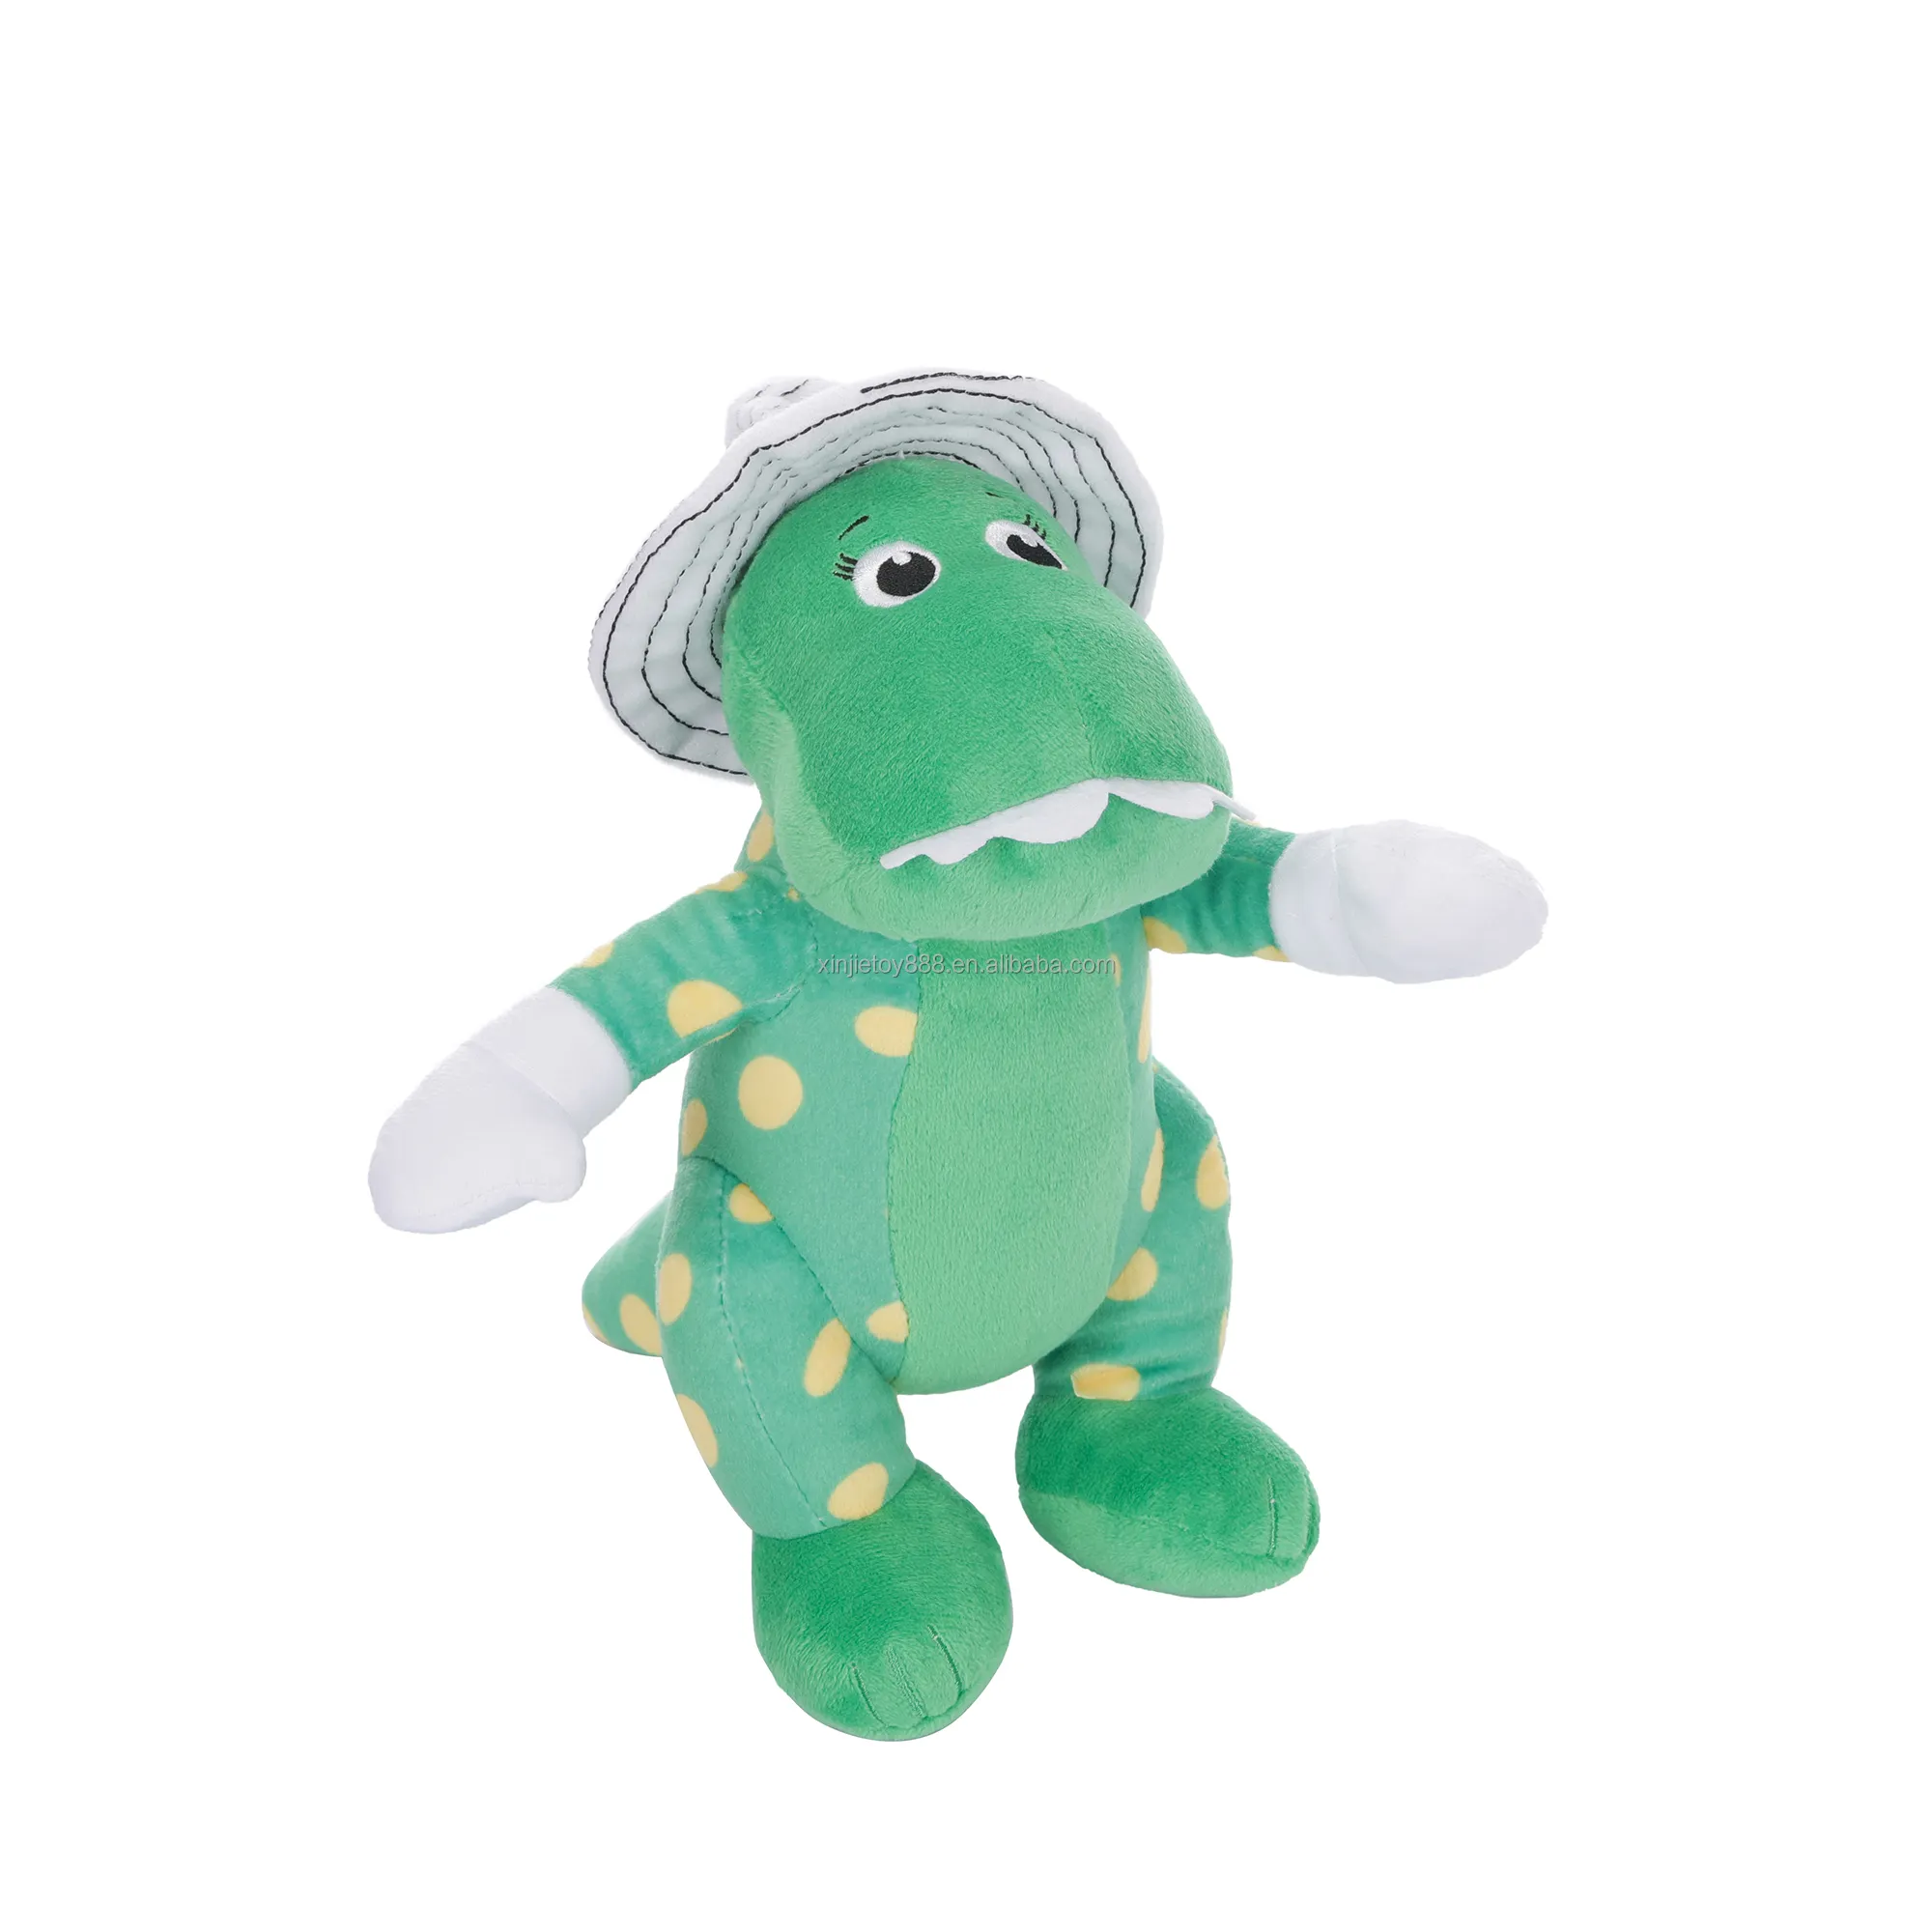 Best selling Customized size stuffed toy with hat Green dinosaur plush toys soft animal toy